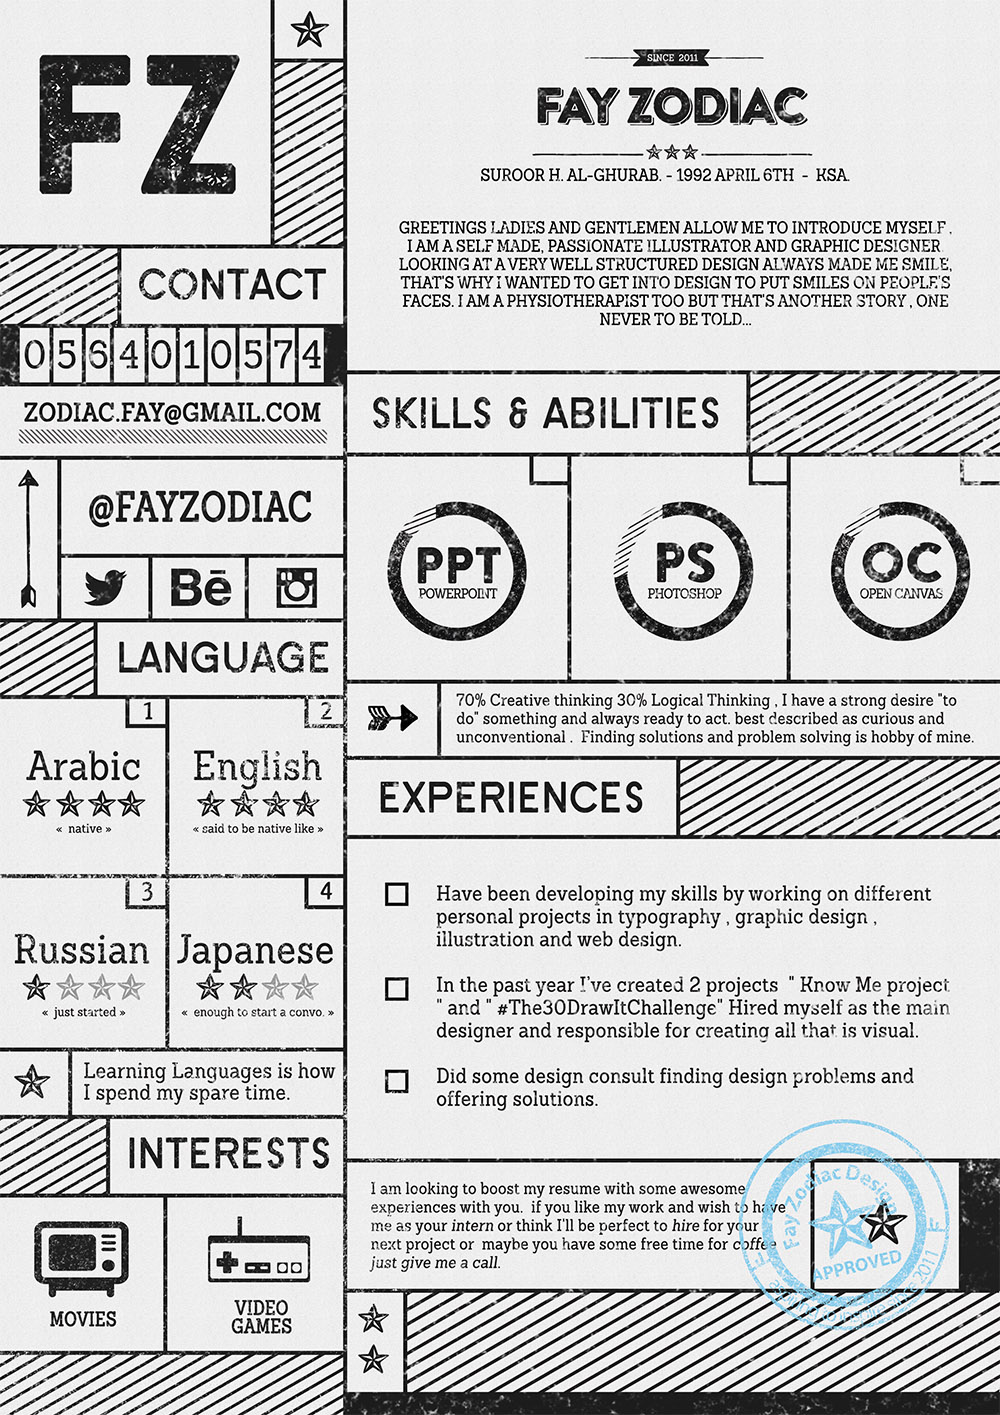 Free Resume Template PSD Download